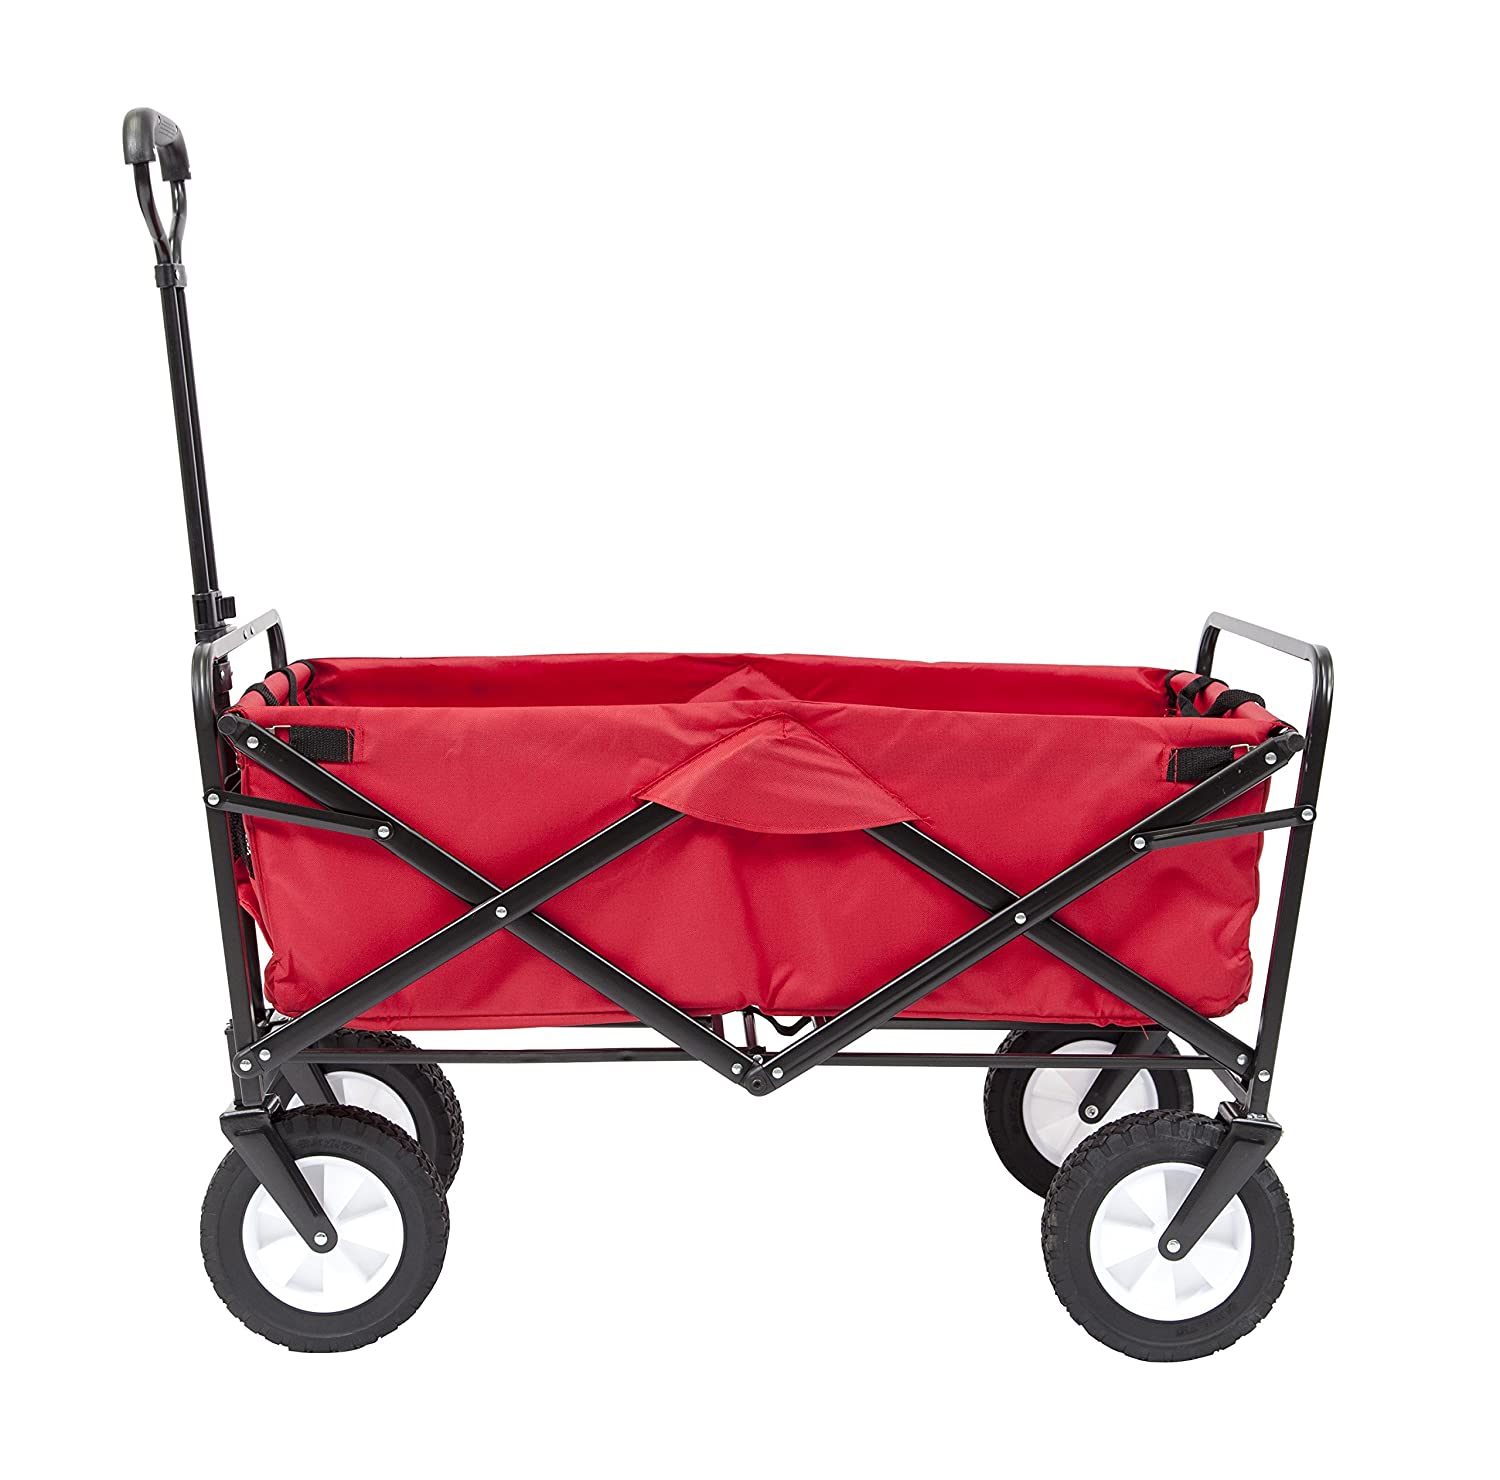 Top 10 Best Wagons for Kids Reviews in 2022 7